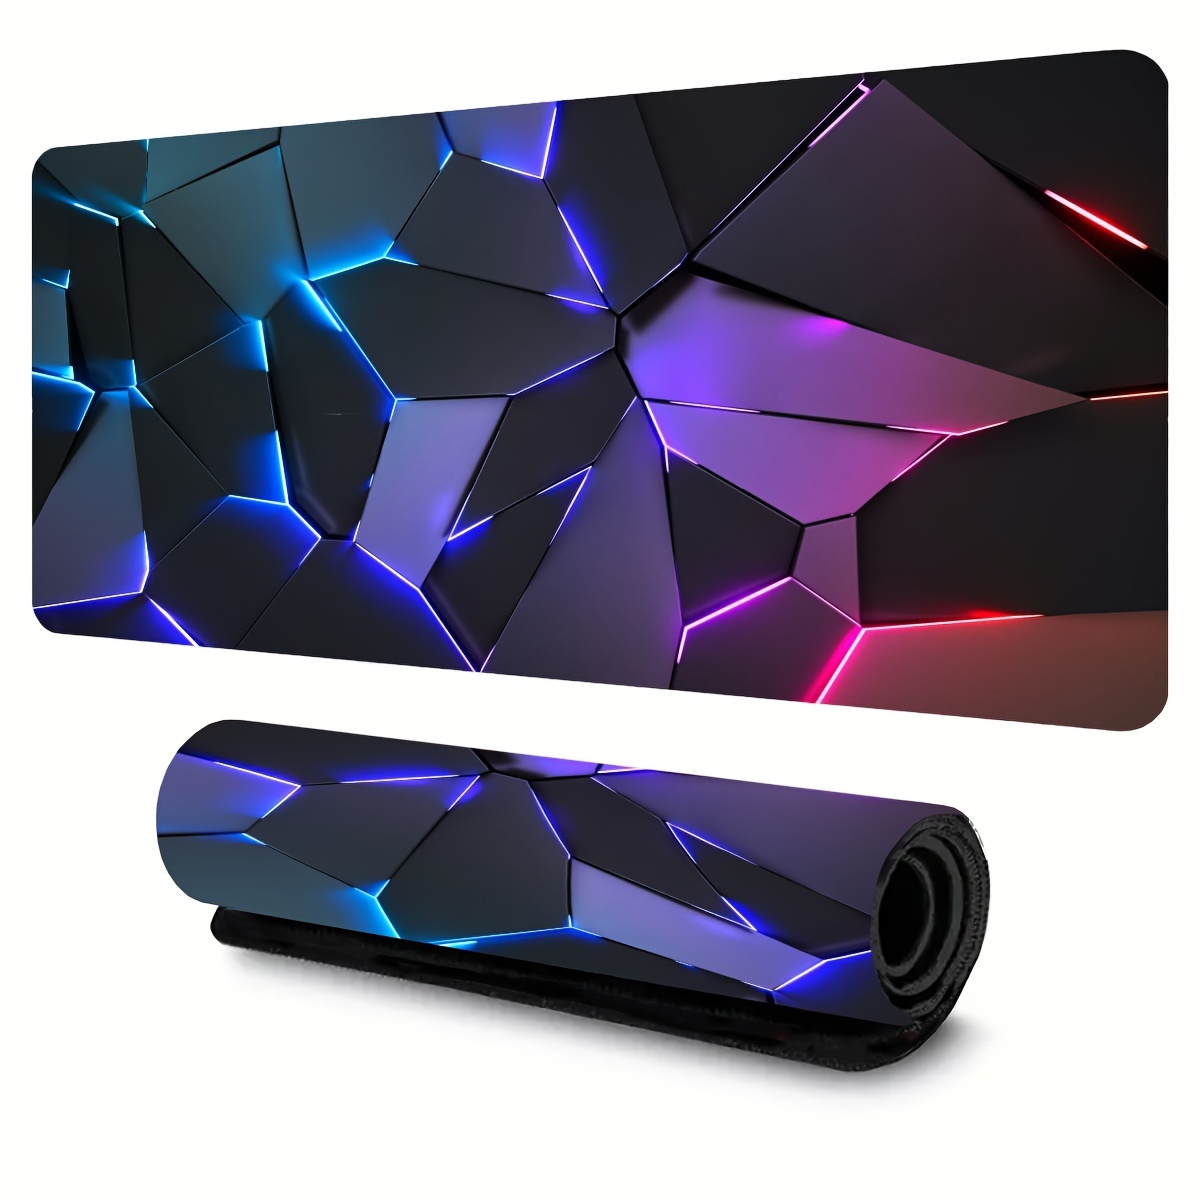 

Xl Gaming Mouse Pad - 31.5 X 11.8" Extended Desk Mat With Non-slip Base, Washable Polyester, Ideal For Home Office Work